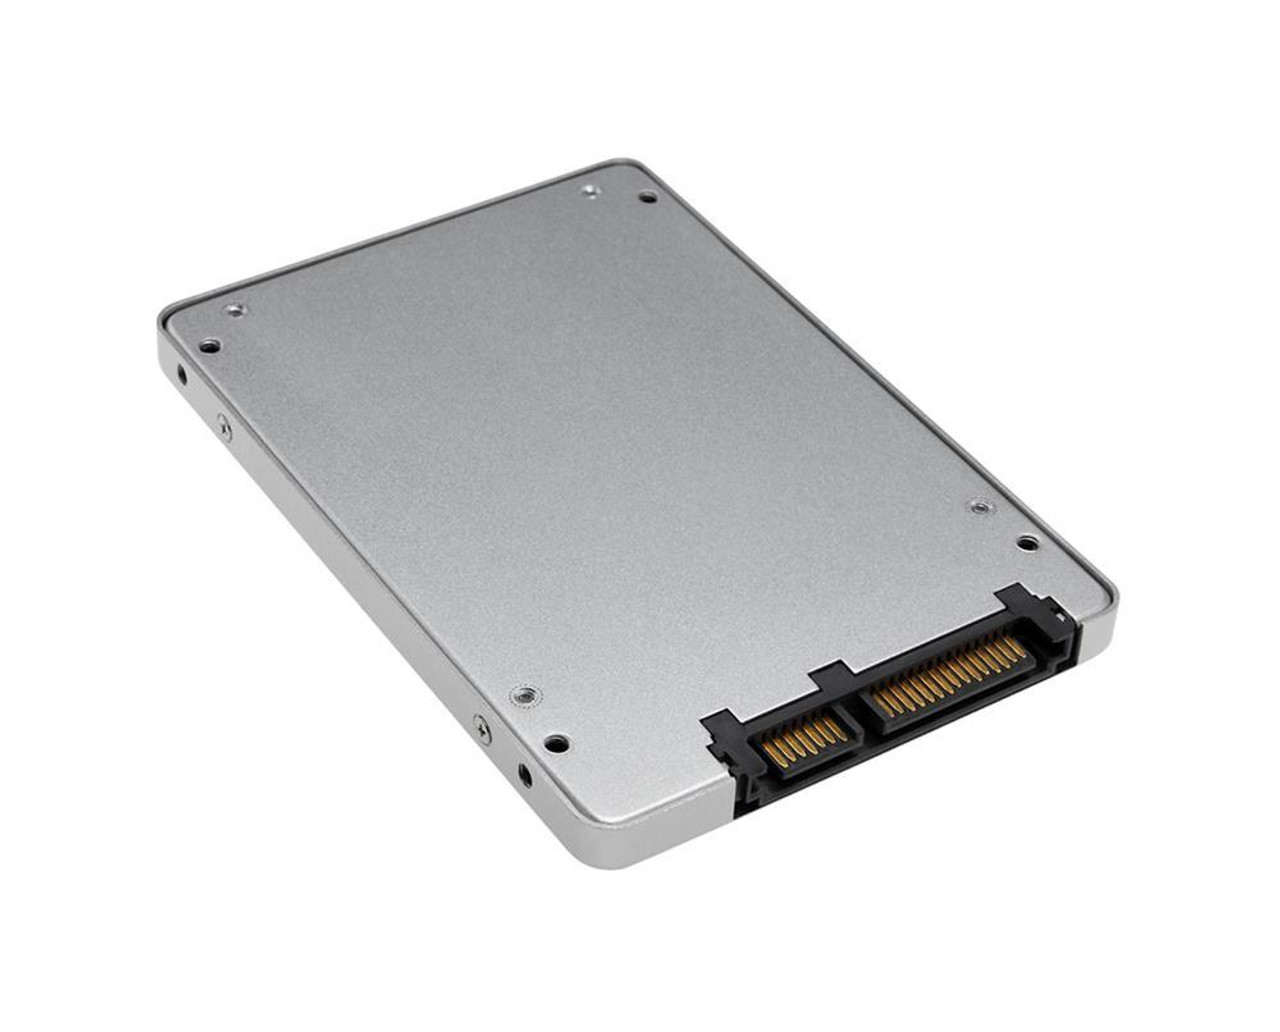 03B0100021300 ASUS 256GB SATA 6Gbps 2.5-inch Internal Solid State Drive (SSD) for Notebook B and N Series